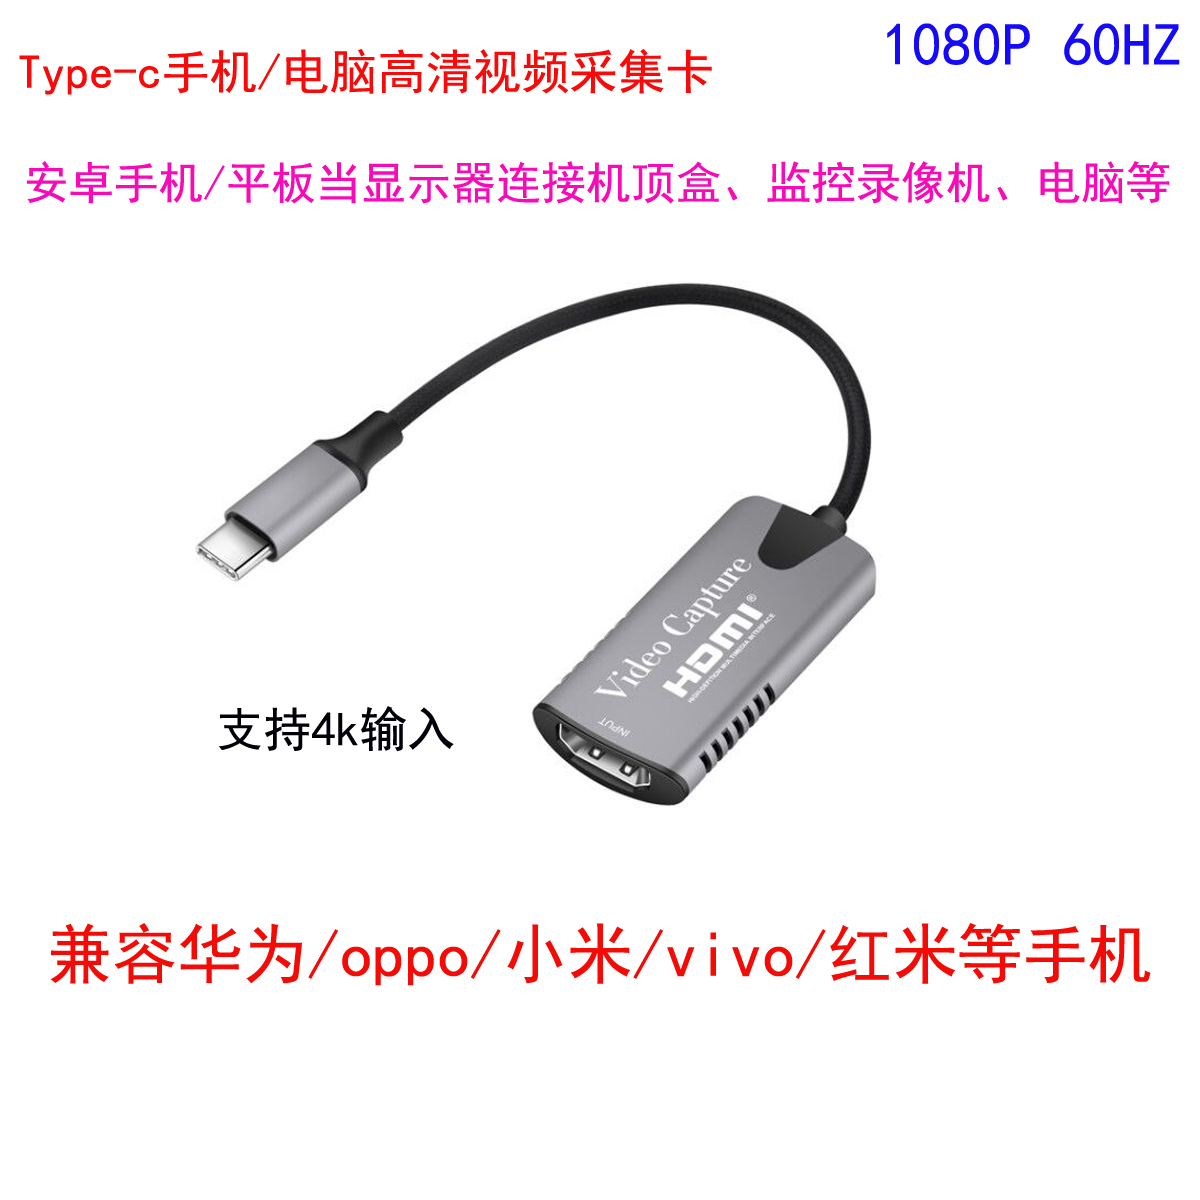 Type-c HD capture card PC host computer surveillance video recorder set-top box HDMI connection mobile phone when the display